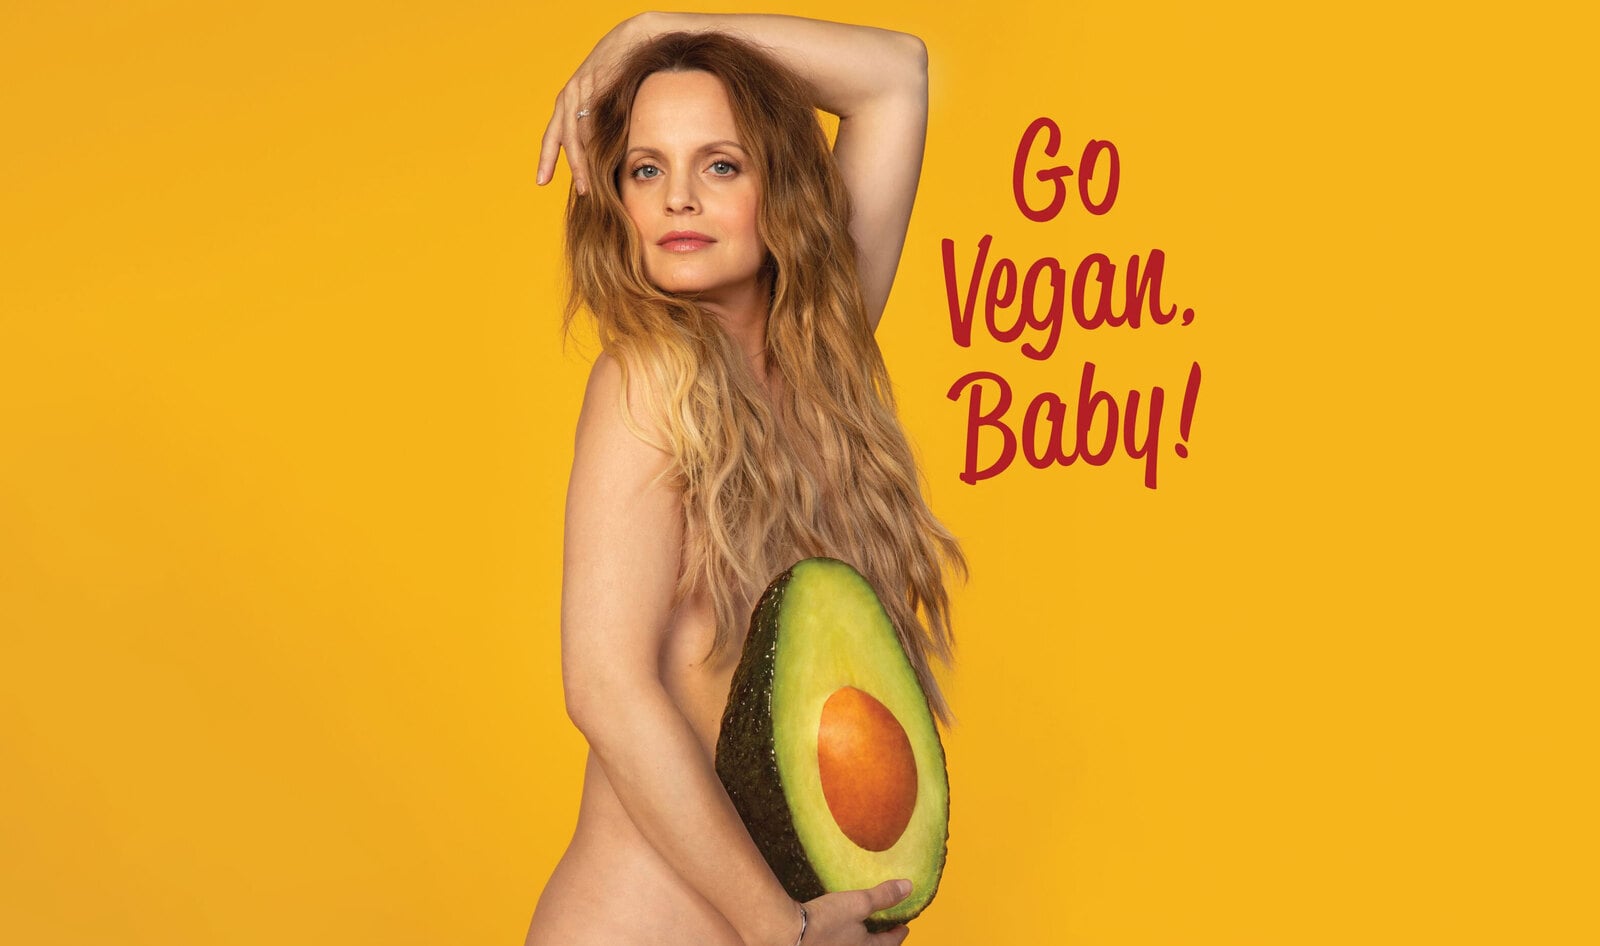 Mena Suvari Says Vegan Pregnancy Is Safe and Healthy In New Campaign